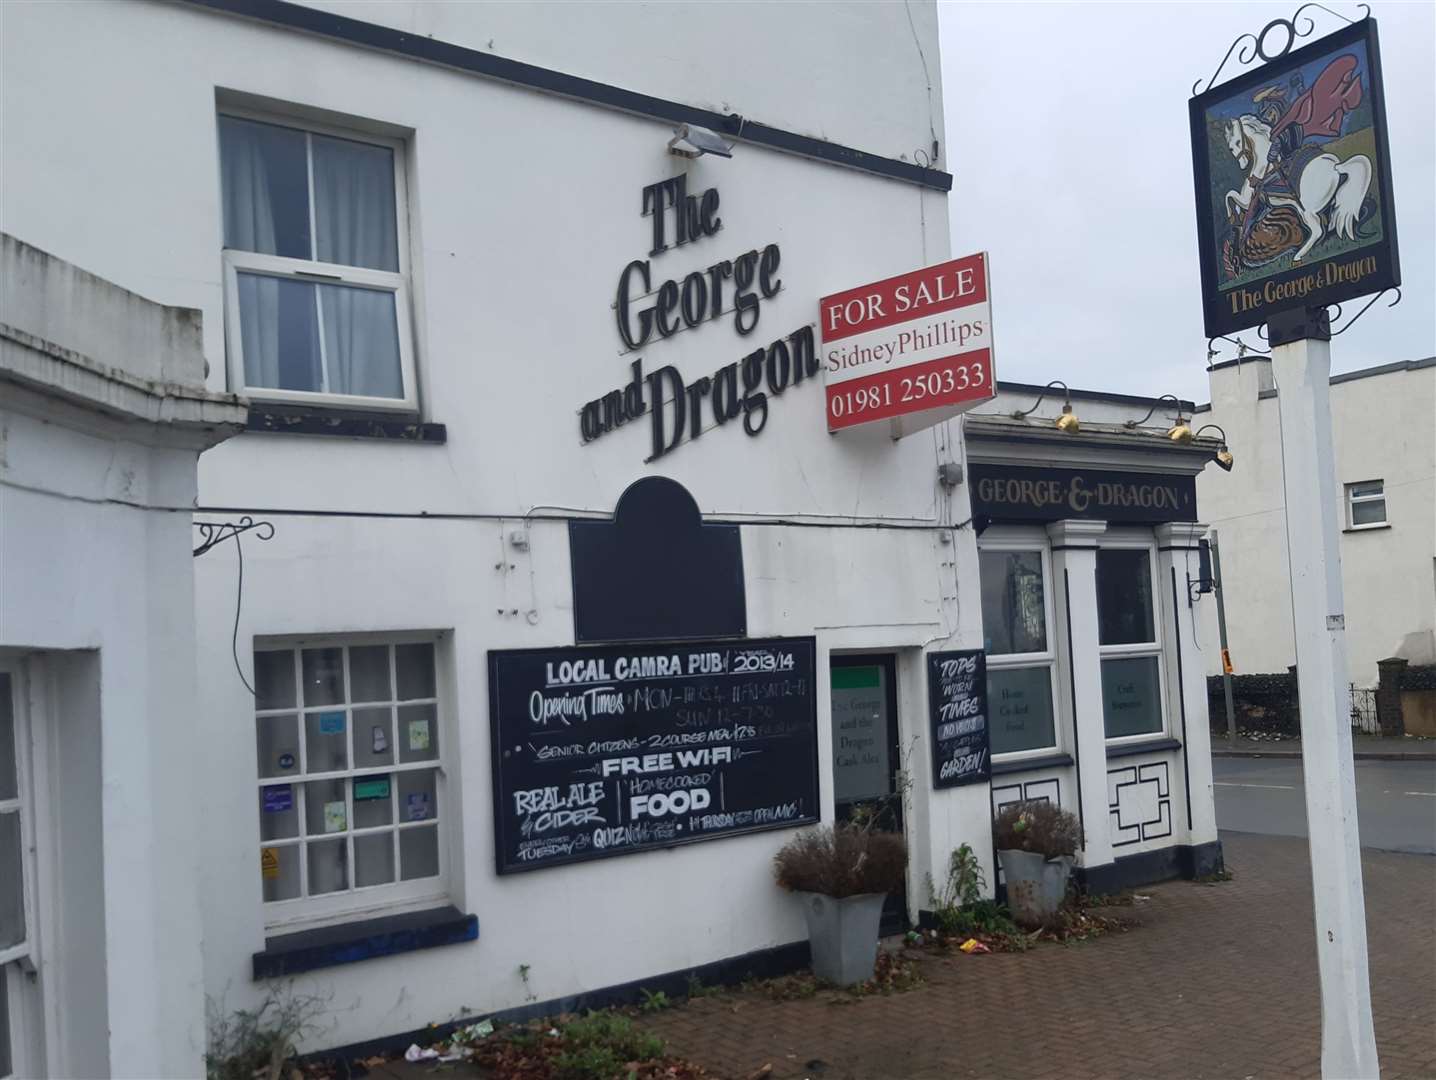 The George and Dragon pub in Swanscombe has been on the market for many years without success